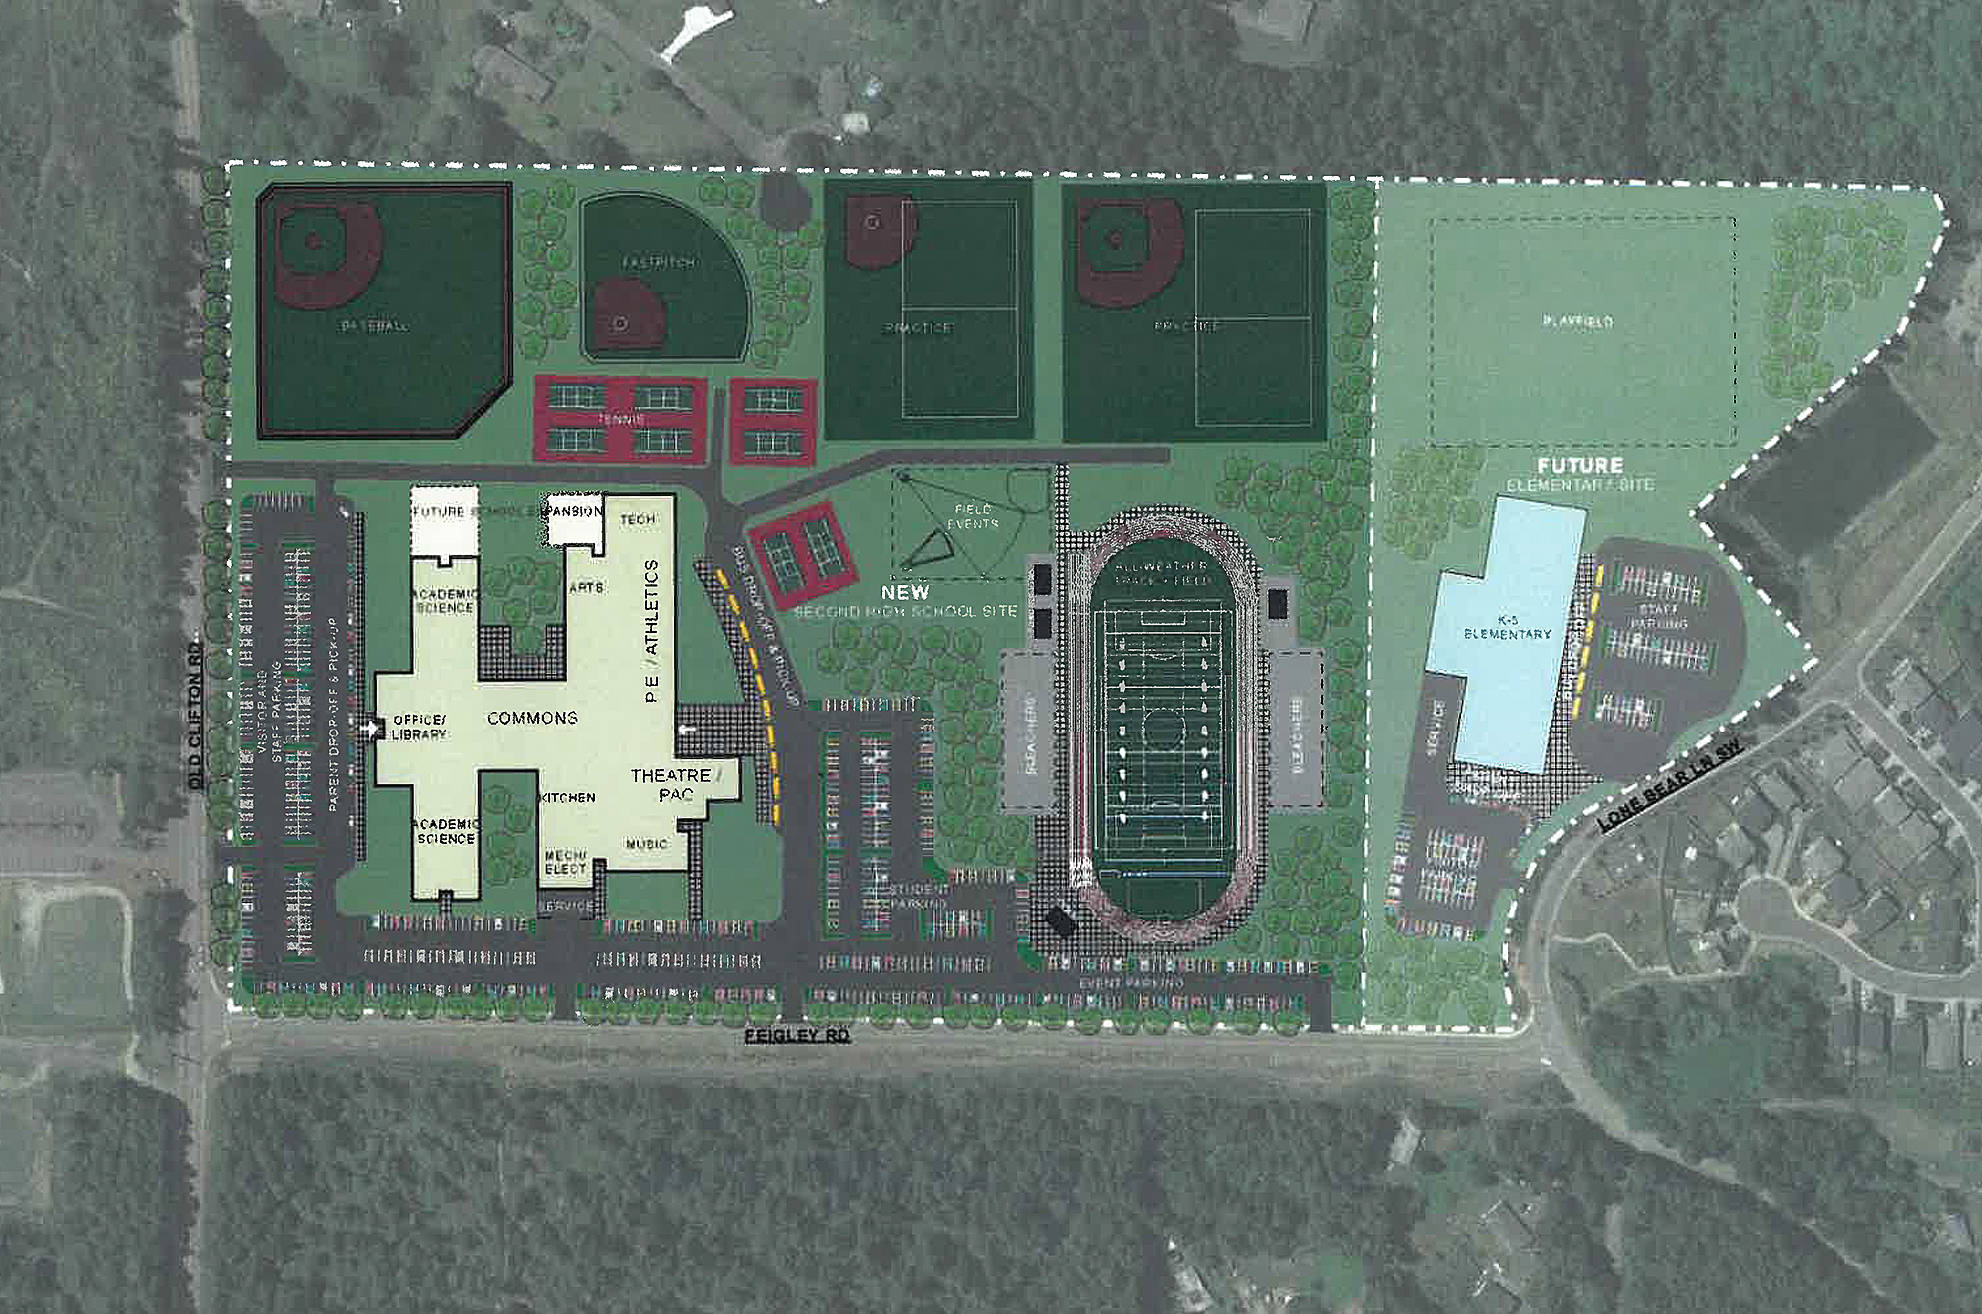 The South Kitsap School District’s board of directors will bring before voters Proposition 1, a $184,680,000 bond measure to construct a new comprehensive high school in November. The district made available at the board meeting July 18 a preliminary concept design of the high school on the district-owned property next to Old Clifton Road. (South Kitsap School District illustration)